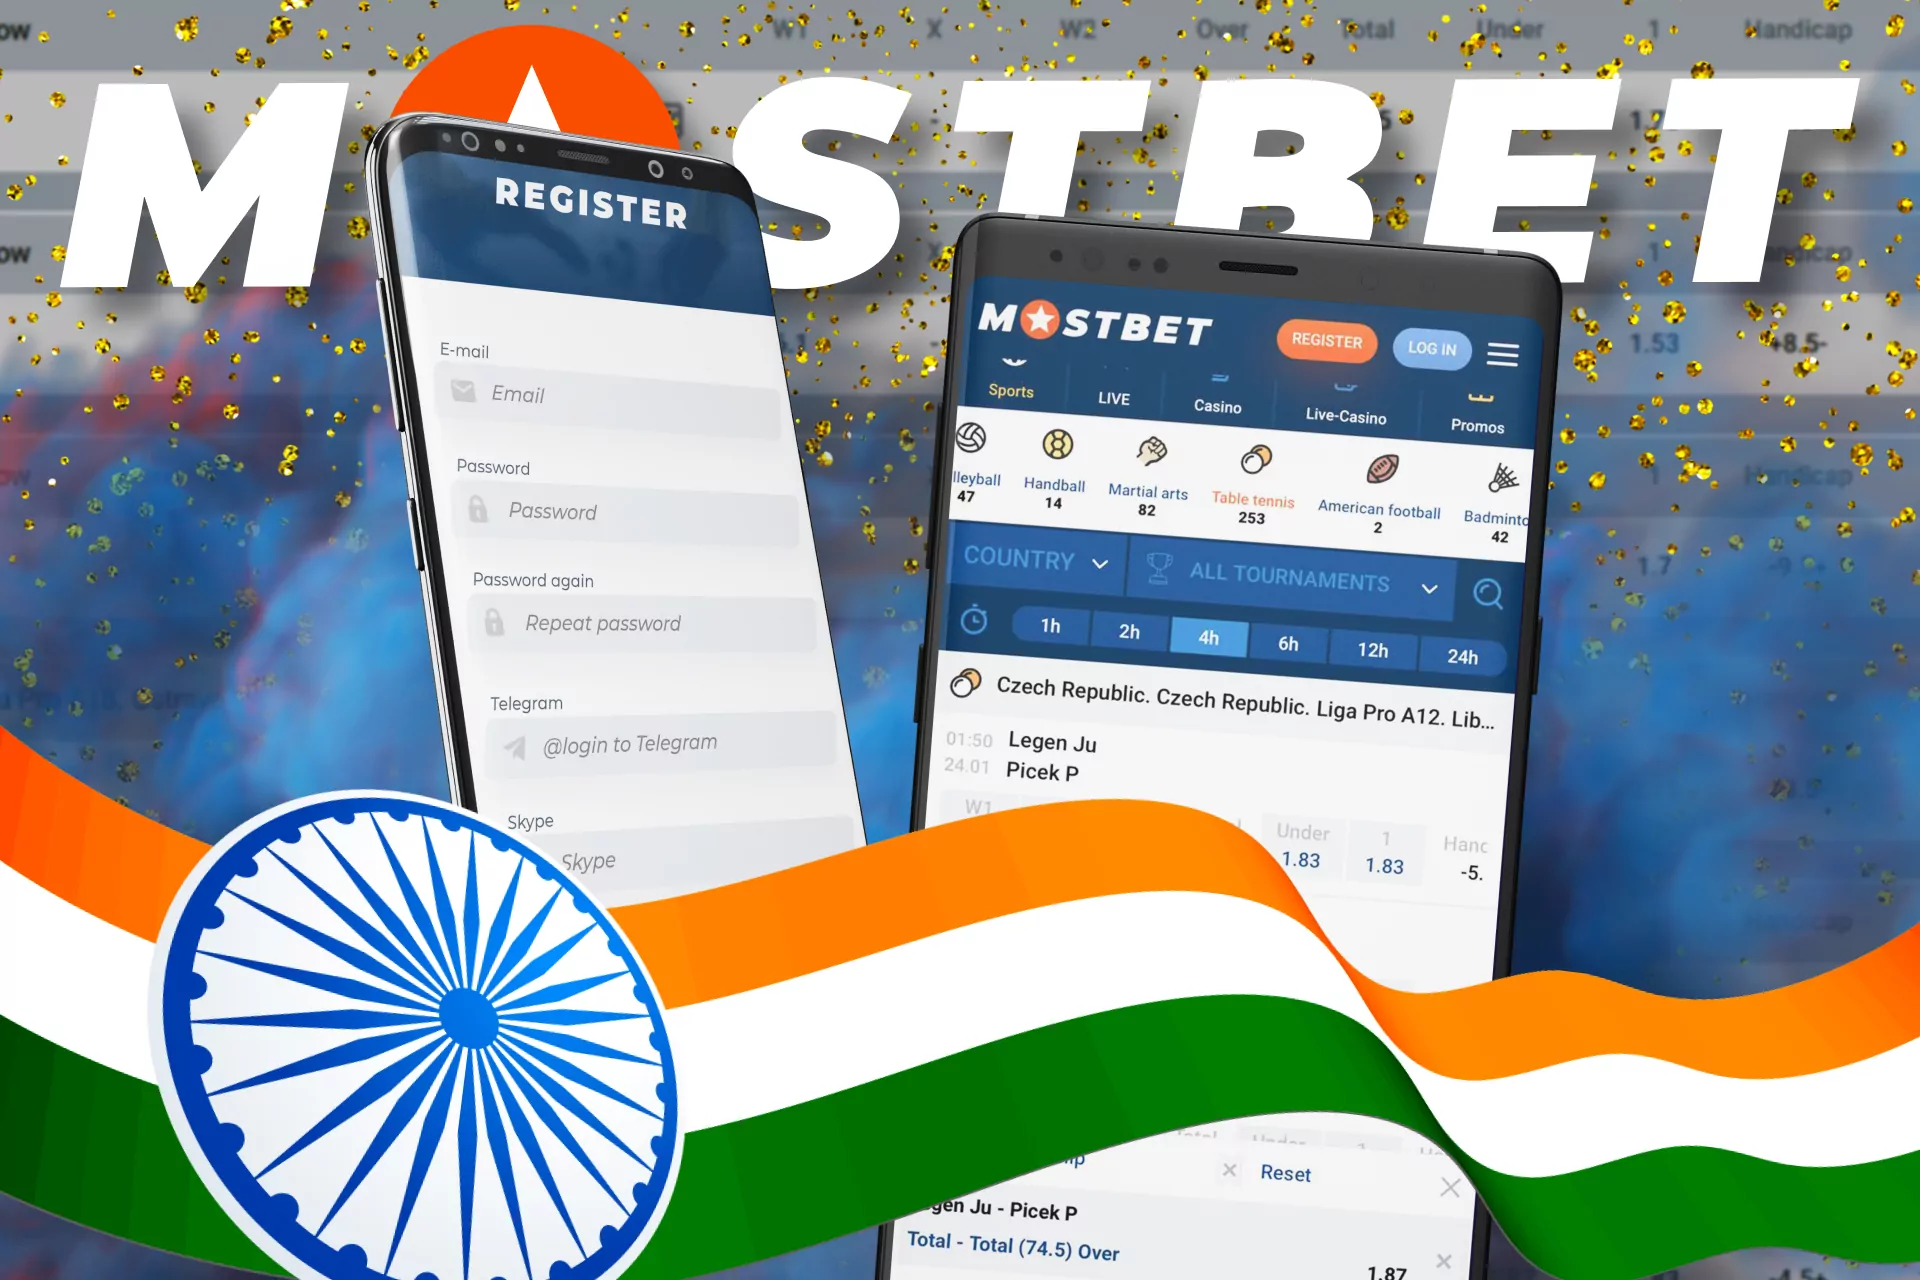 Check the list of benefits for Indian users of the Mostbet app.